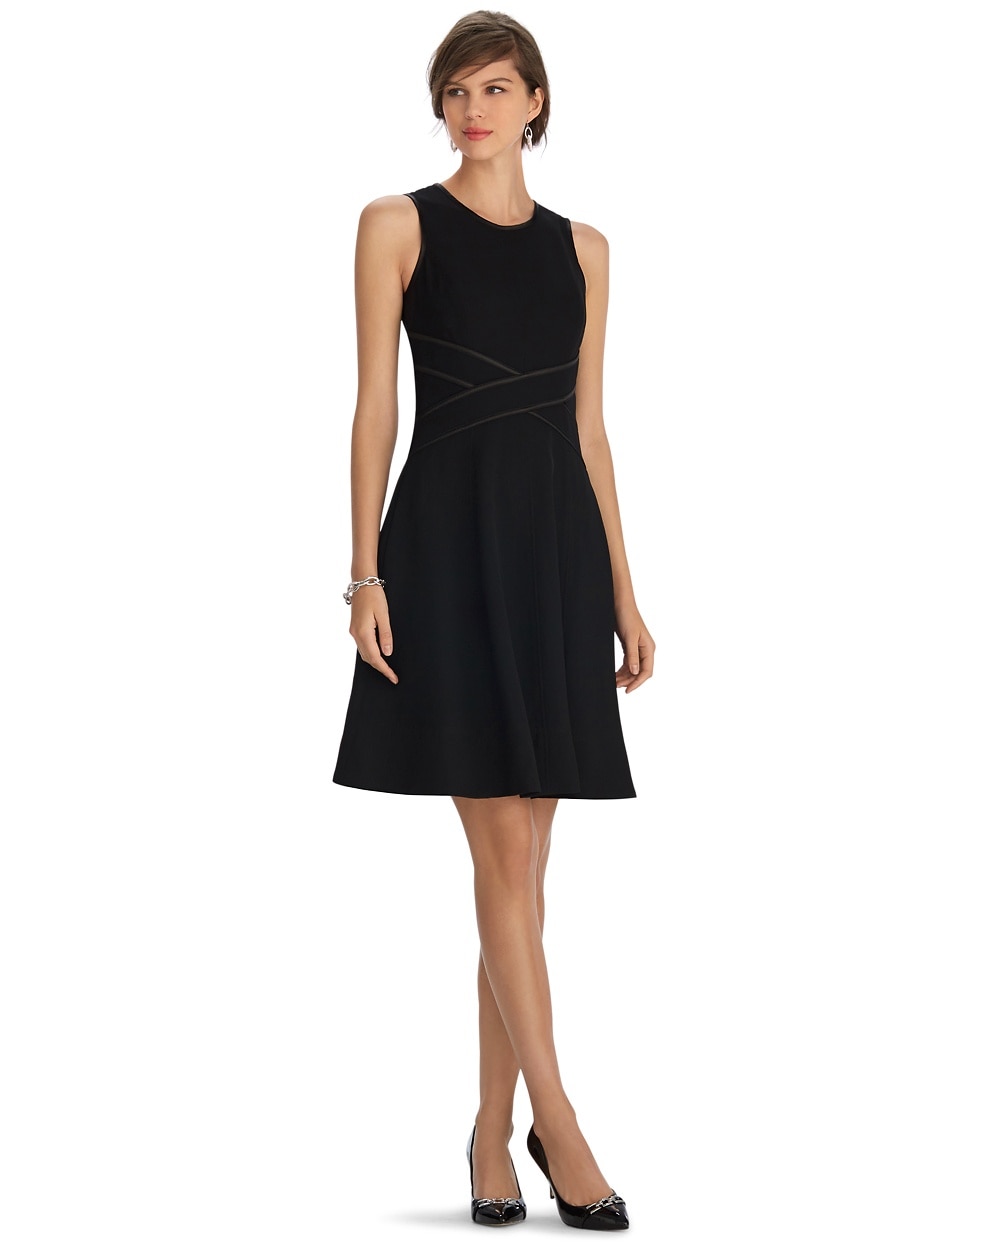 Sleeveless Iconic Fit and Flare Black Dress - WHBM